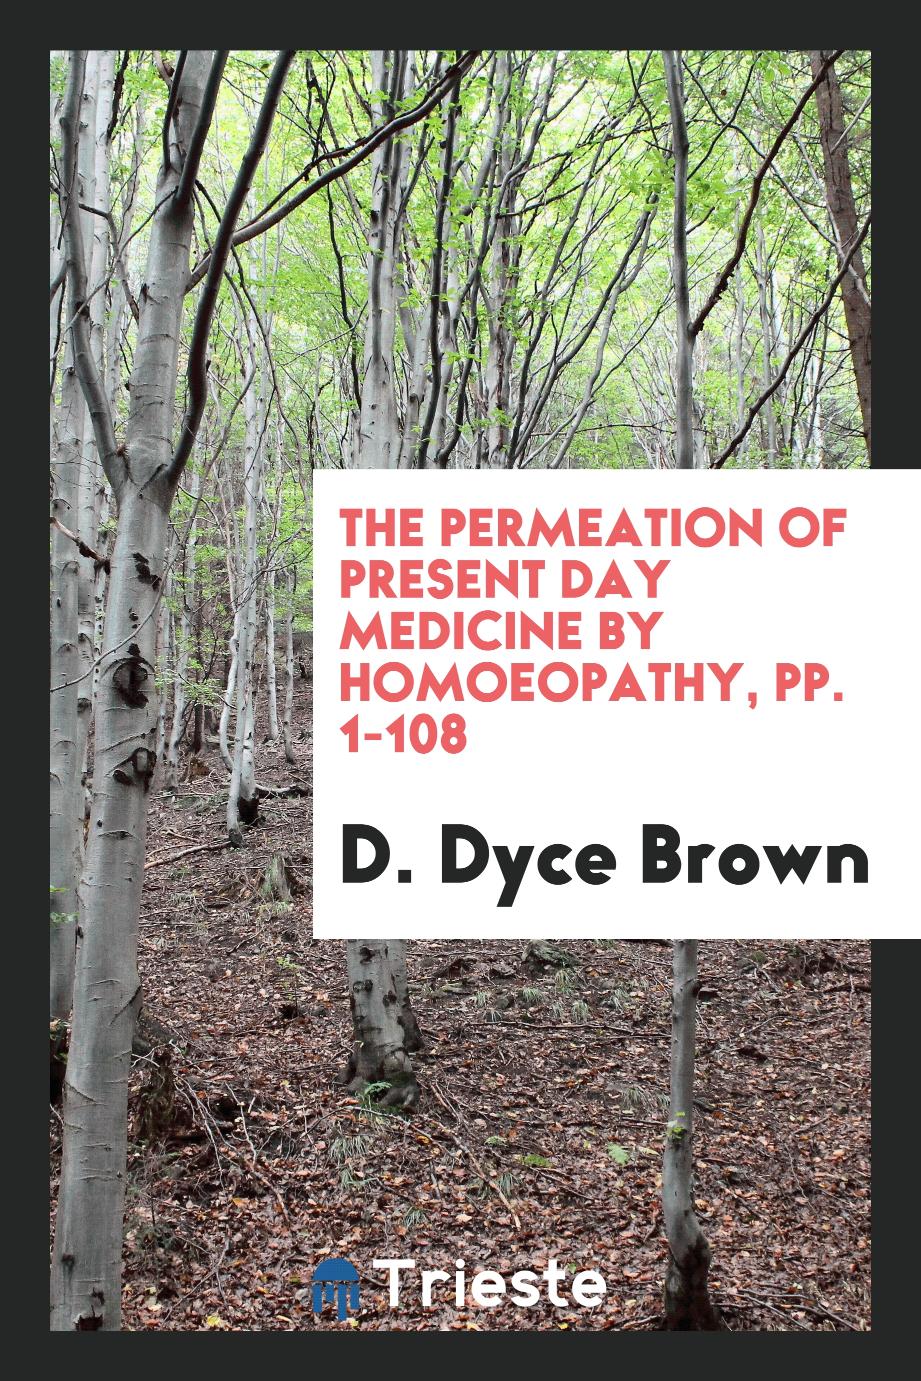 The Permeation of Present Day Medicine by Homoeopathy, pp. 1-108